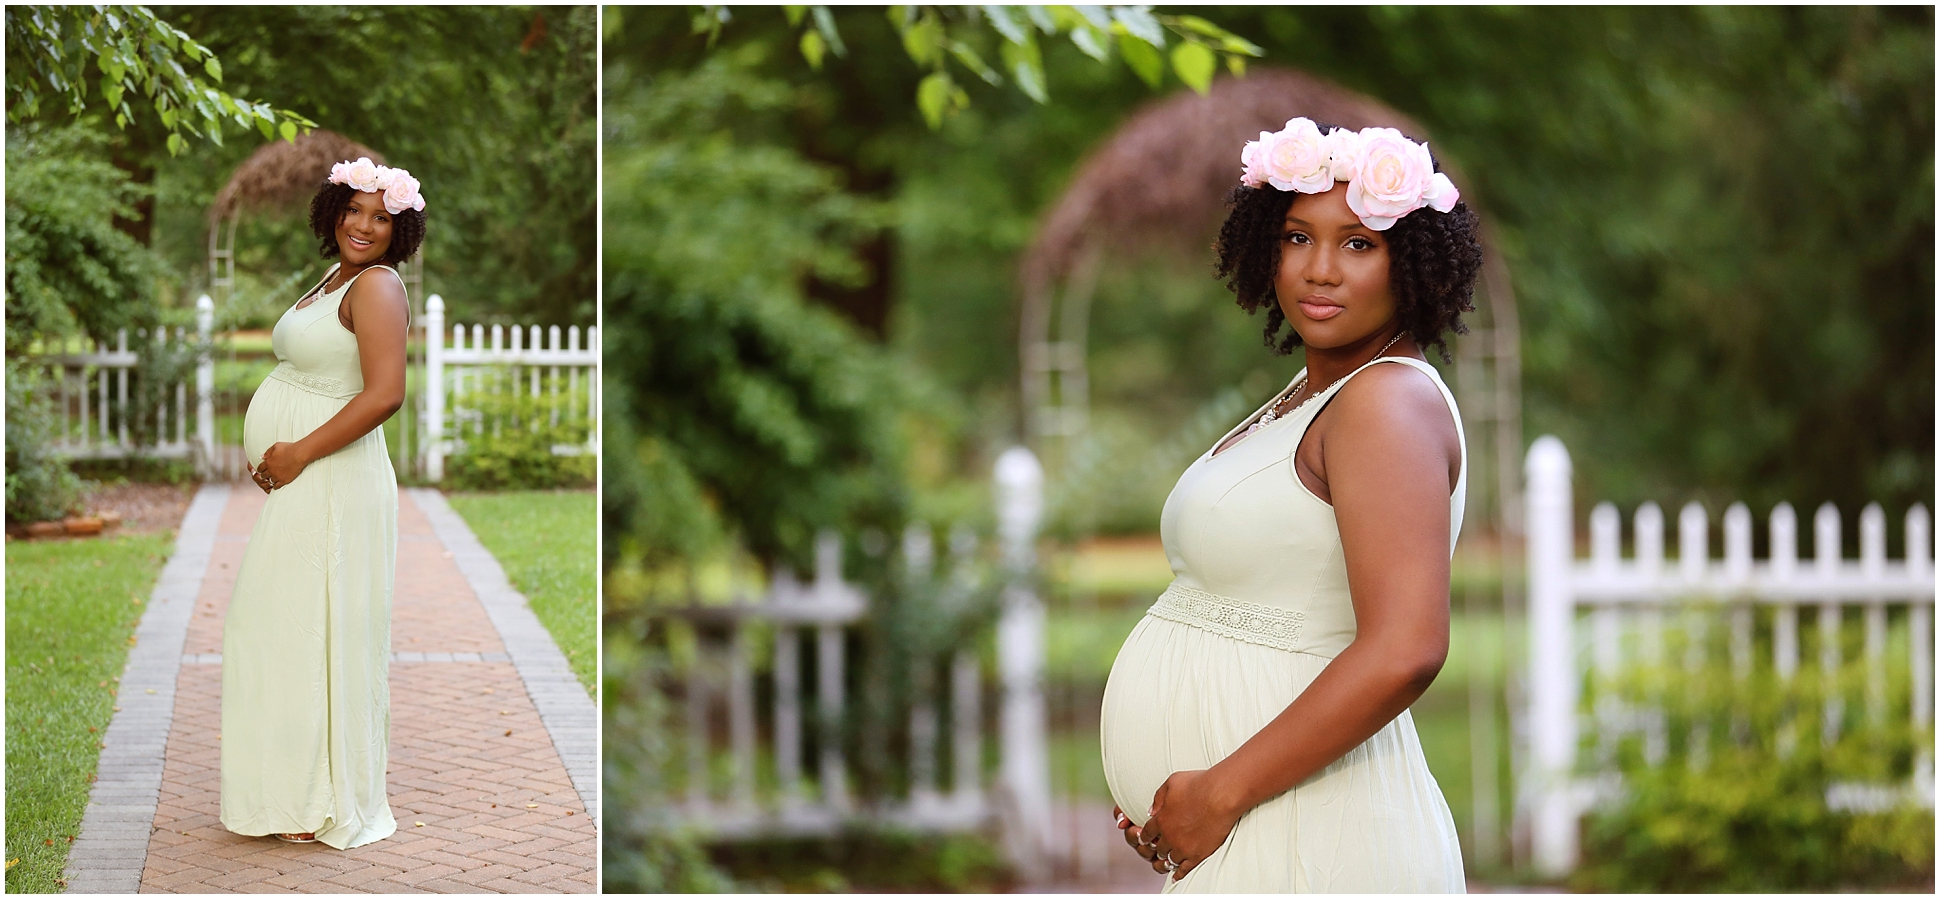 Romantic Garden Maternity Session by Two Chics Photography | www.twochicsphotography.com